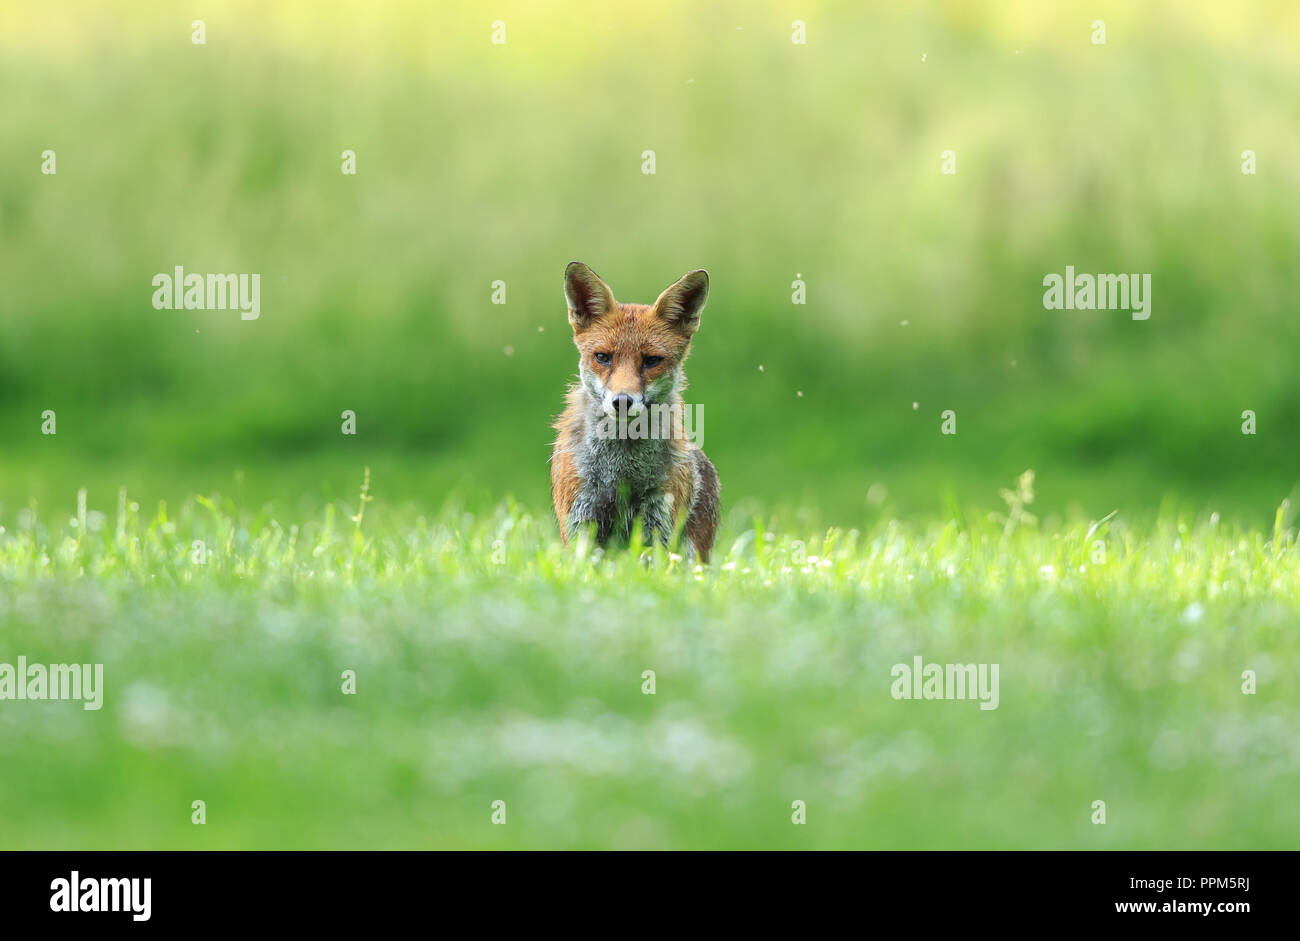 An urban red fox in the park during the day Stock Photo